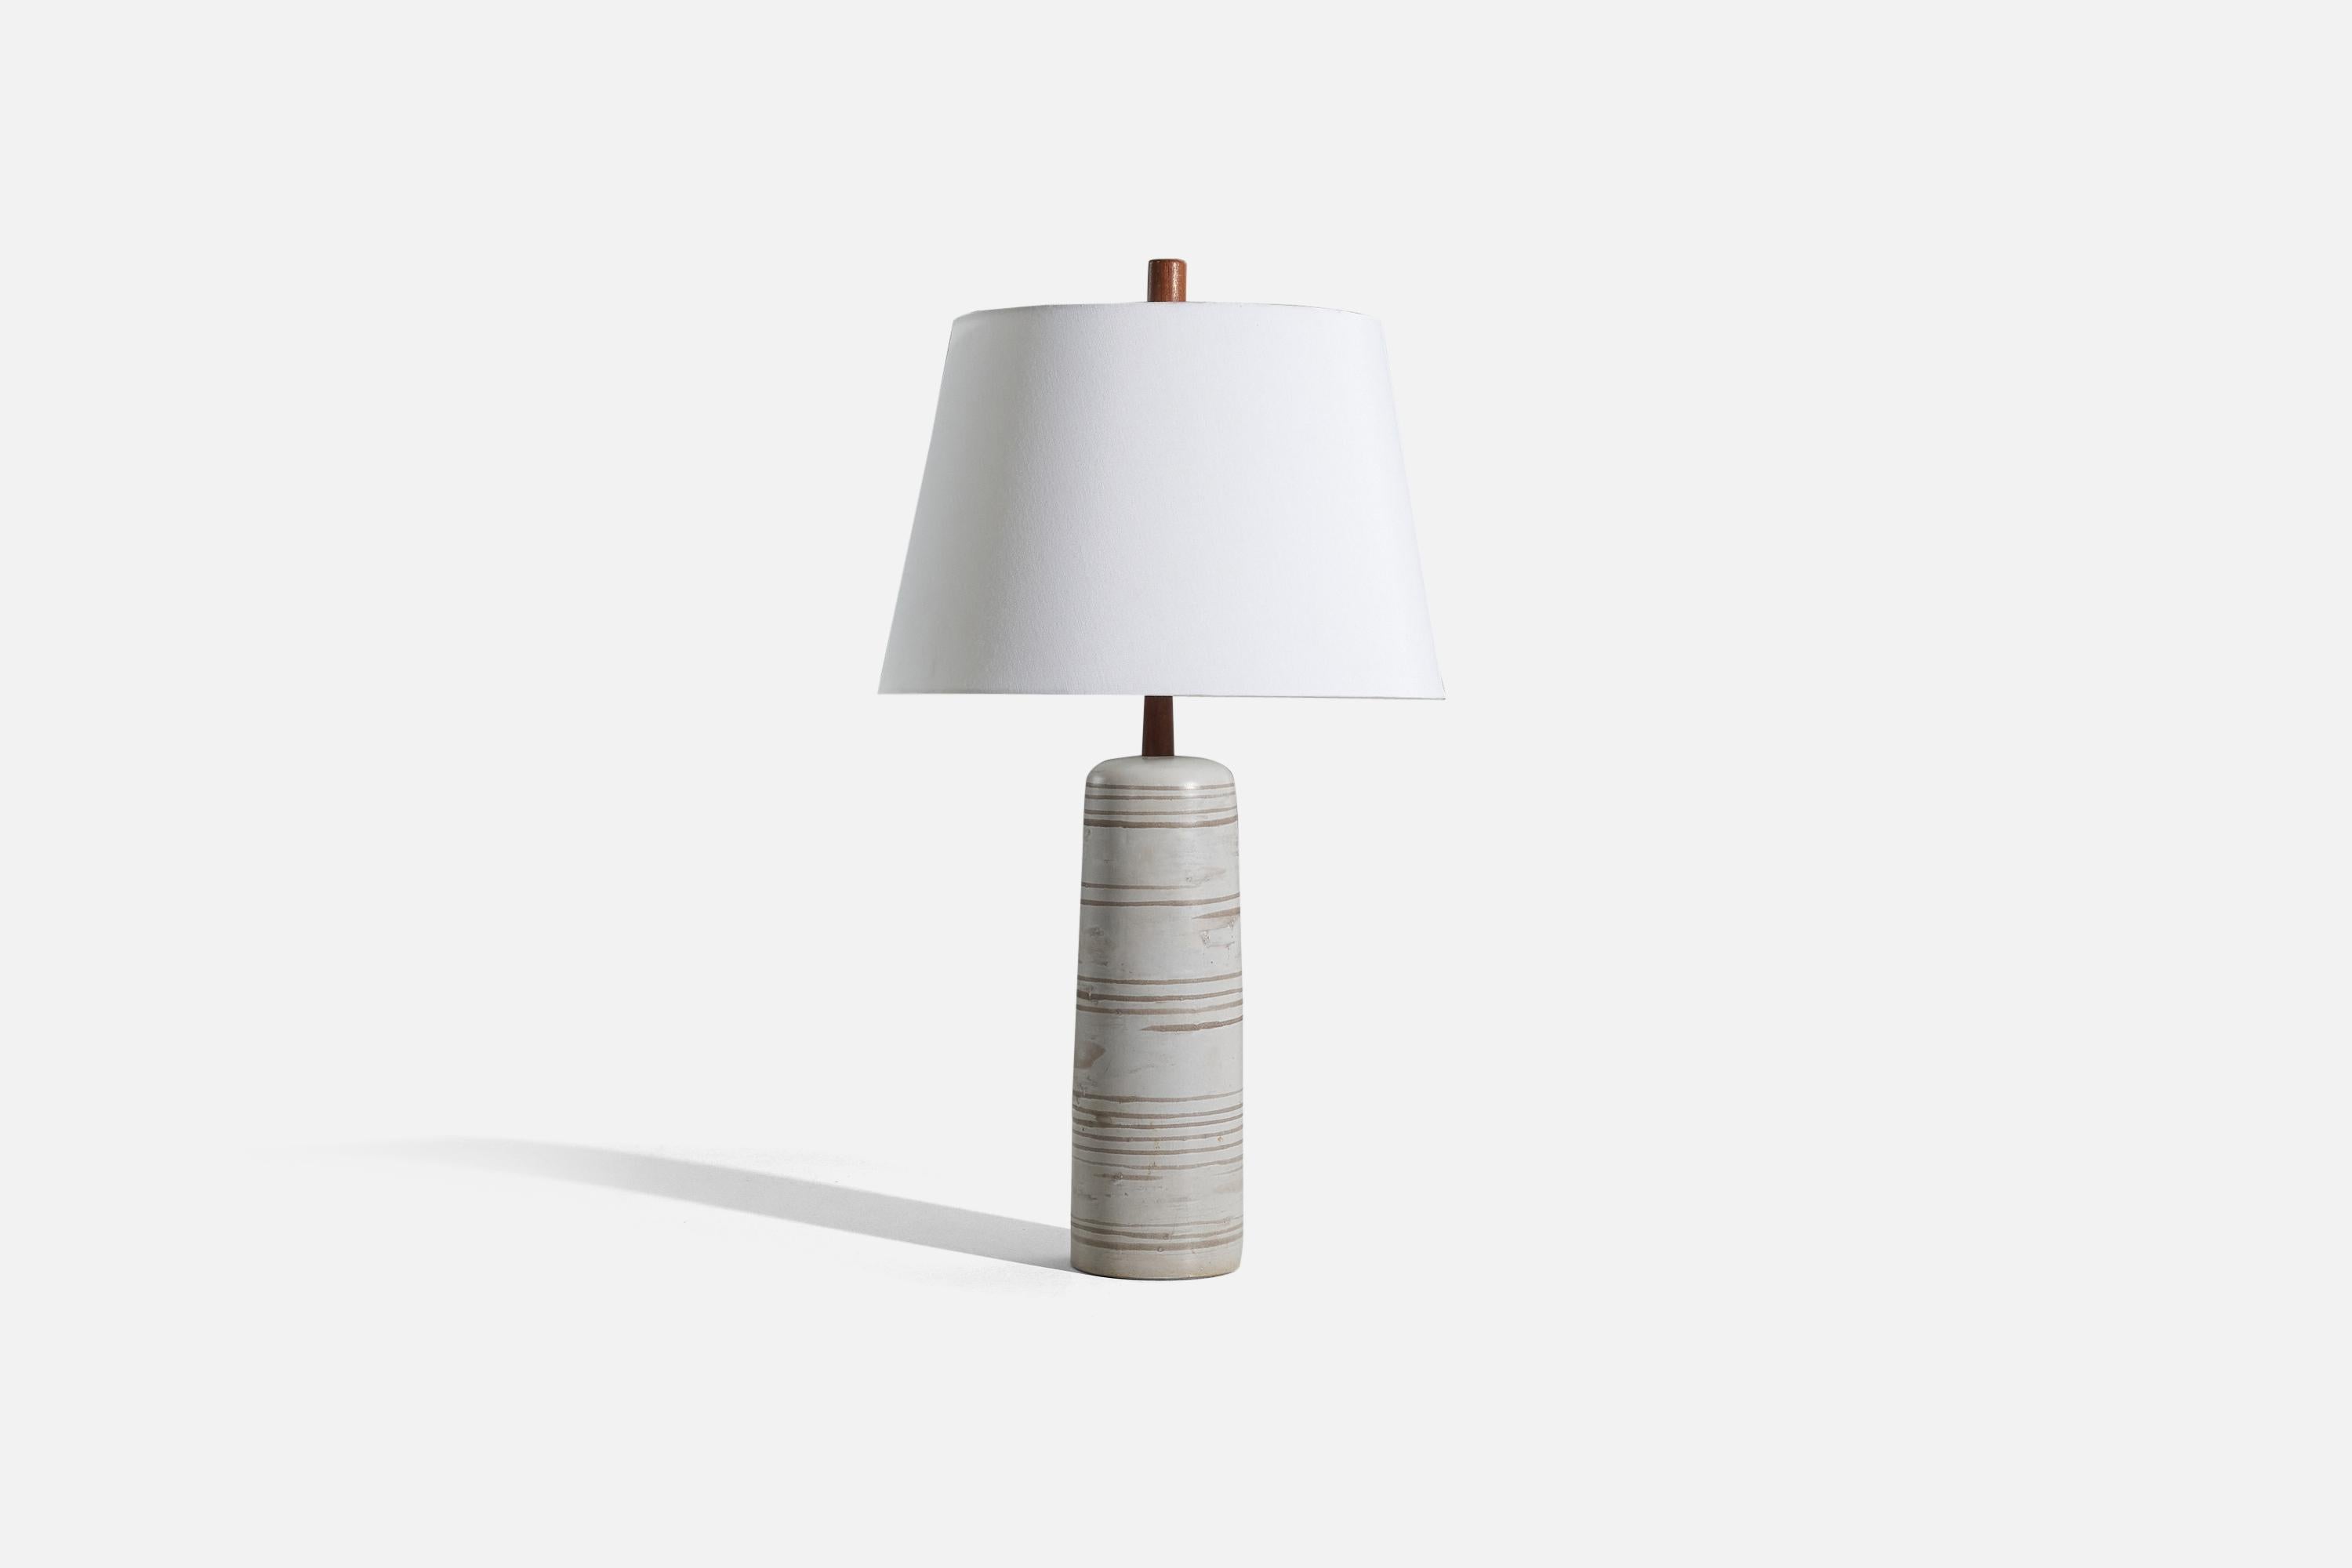 A grey ceramic and walnut table lamp, designed by Jane & Gordon Martz and produced by Marshall Studios, Indianapolis, United States, 1960s.

Sold without lampshade. 
Dimensions of Lamp (inches) : 20 x 5 x 5 (H x W x D)
Dimensions of Shade